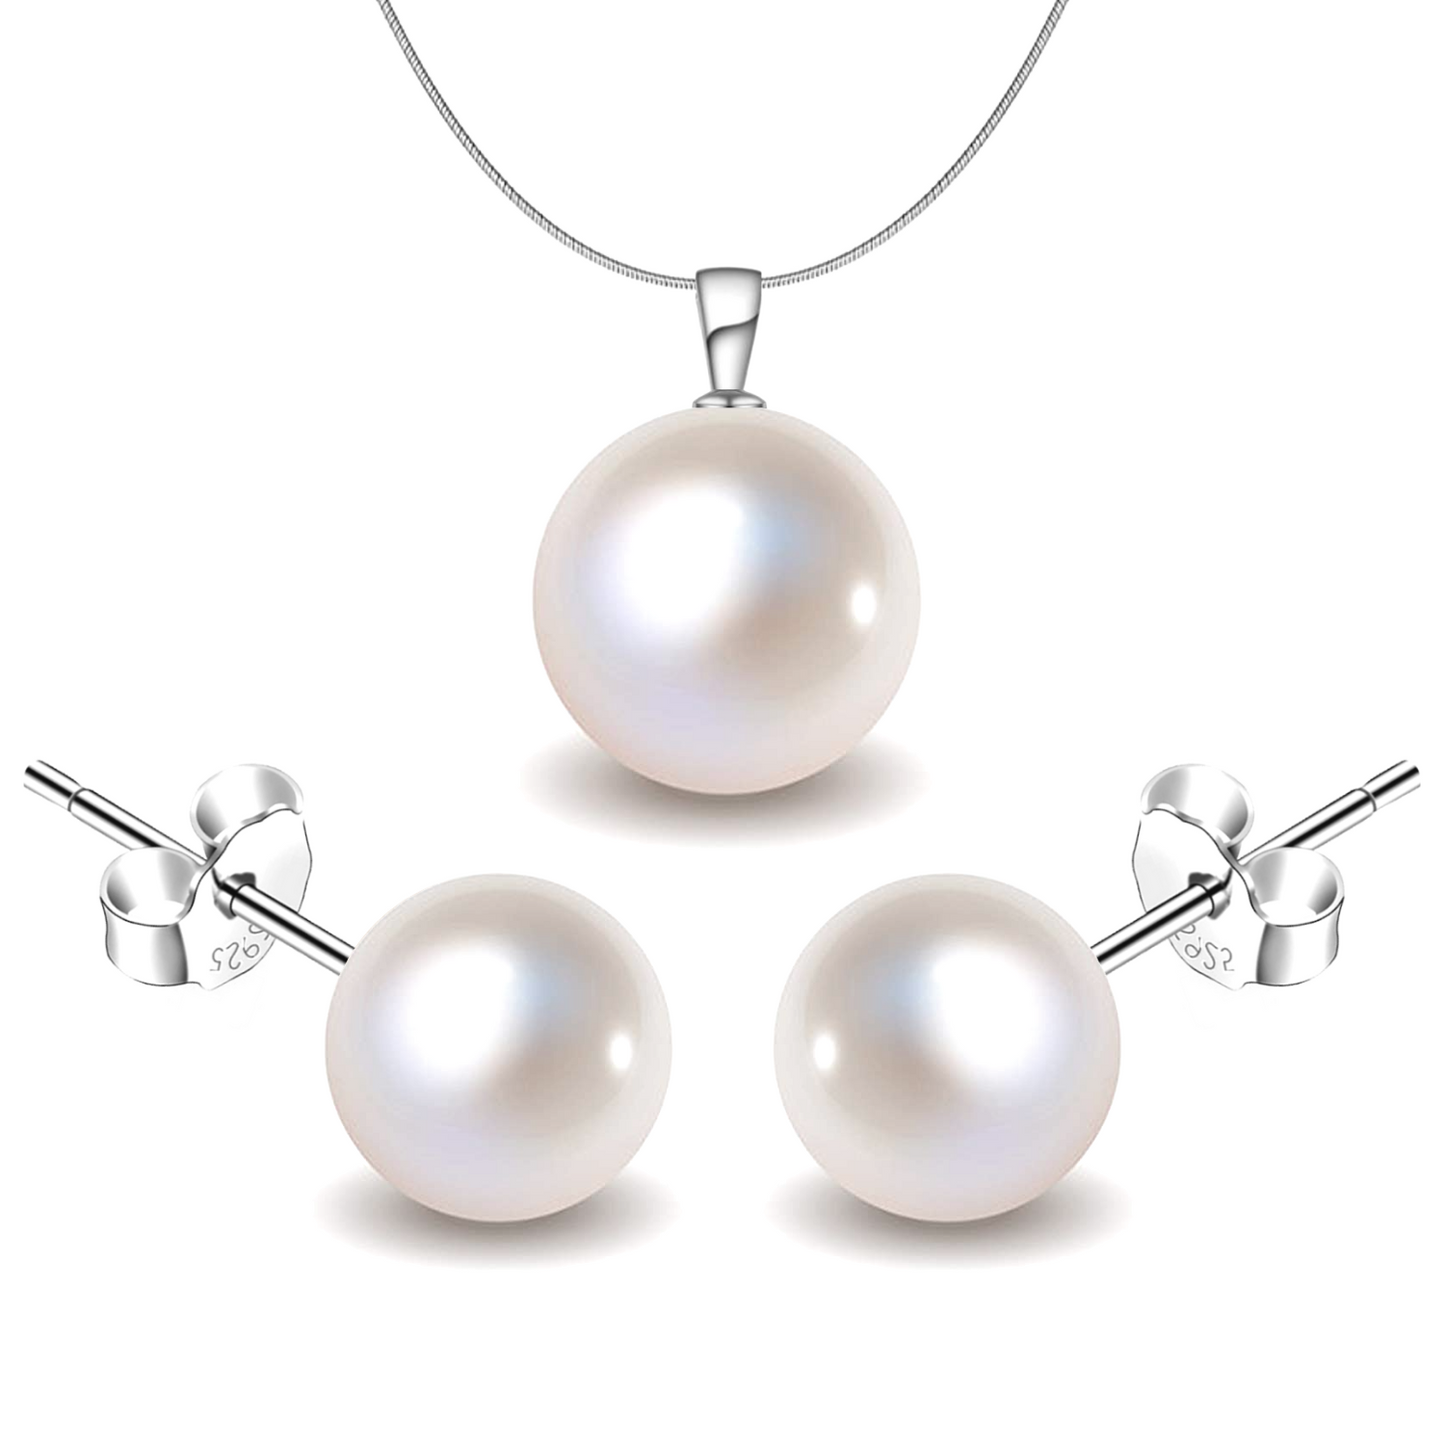 Pearl Set in 92.5 Silver South Sea Round Pearls - Earrings, Necklace & Chain Set